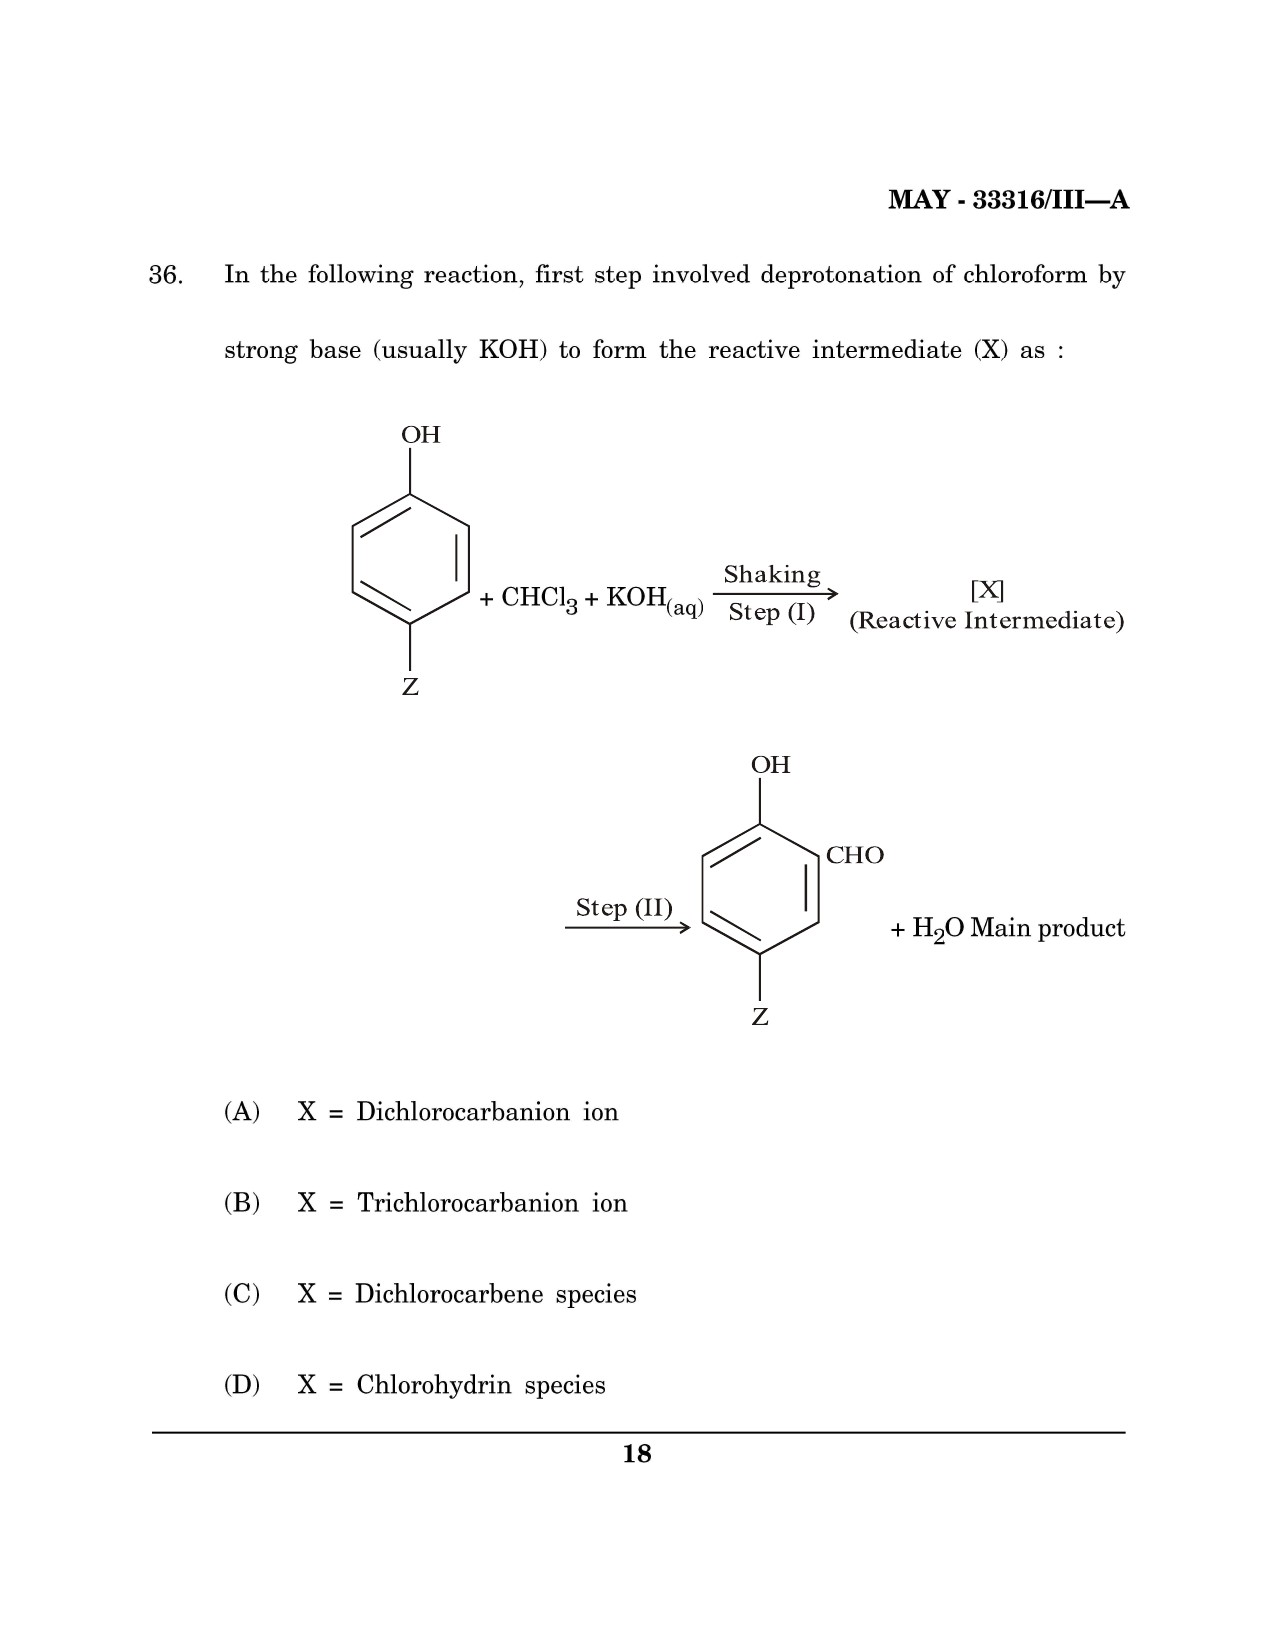 Maharashtra SET Chemical Sciences Question Paper III May 2016 17